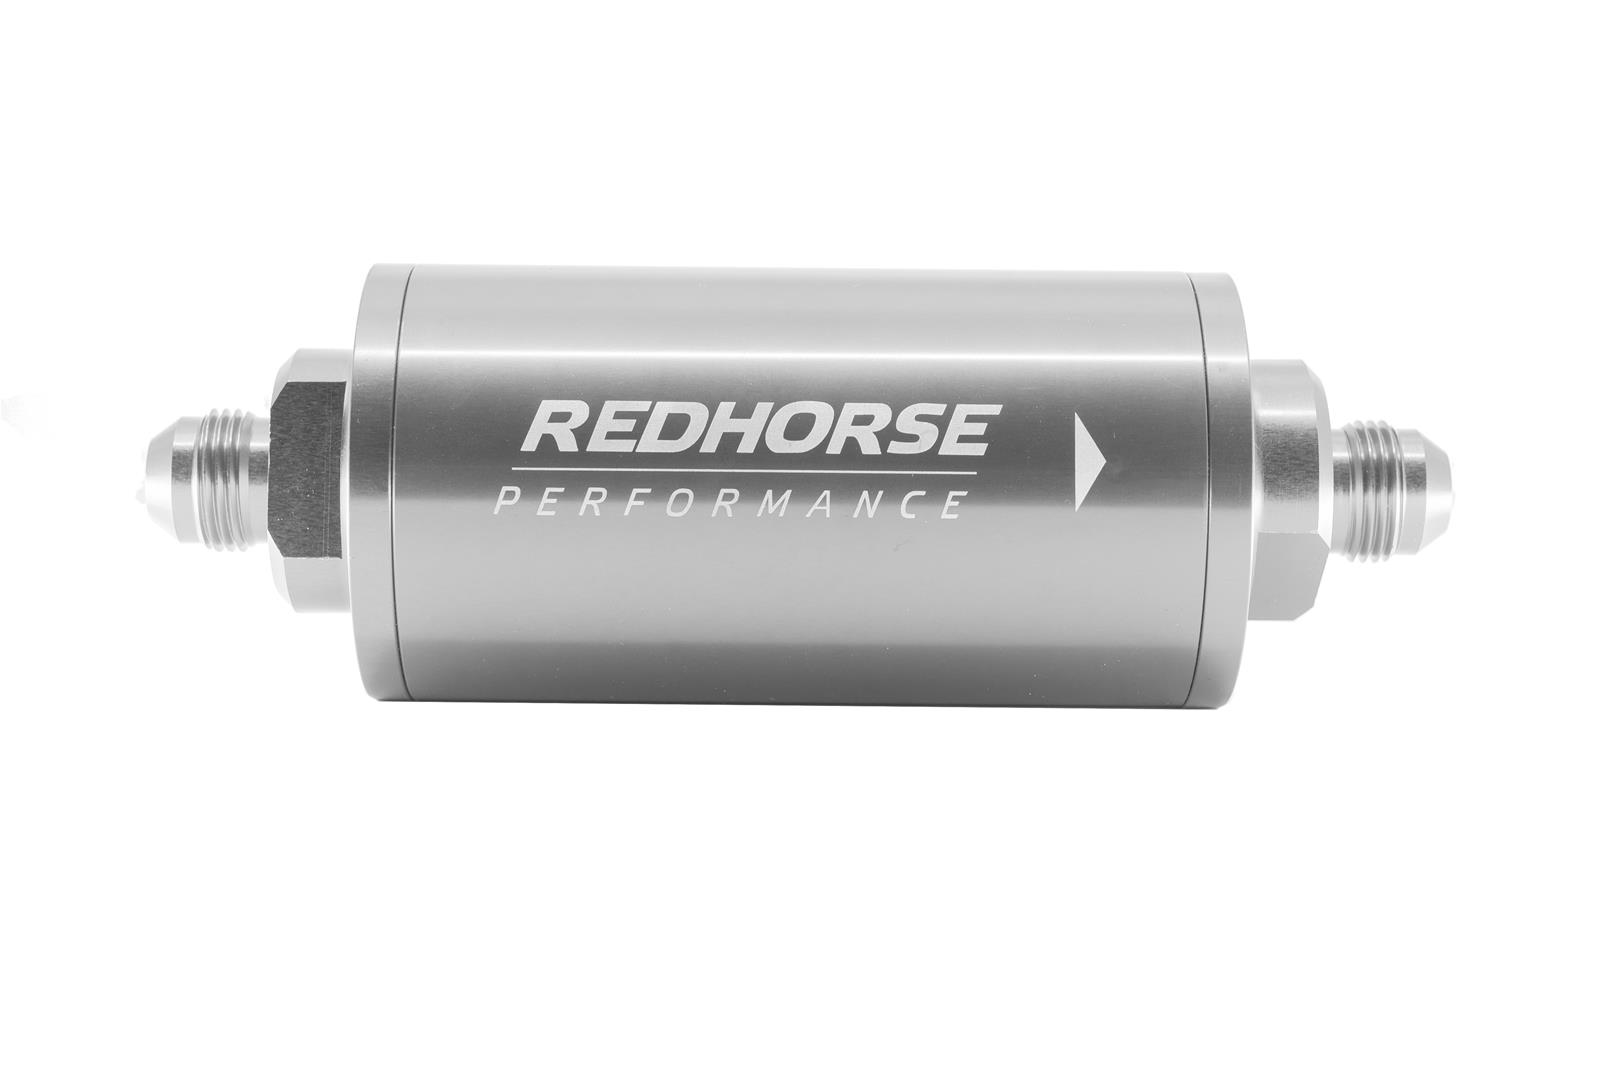 Redhorse Performance 4651-10-5-10 6in Cylindrical In-Line Race Fuel Filter w/ 10 Micron S.S. element - 10 AN